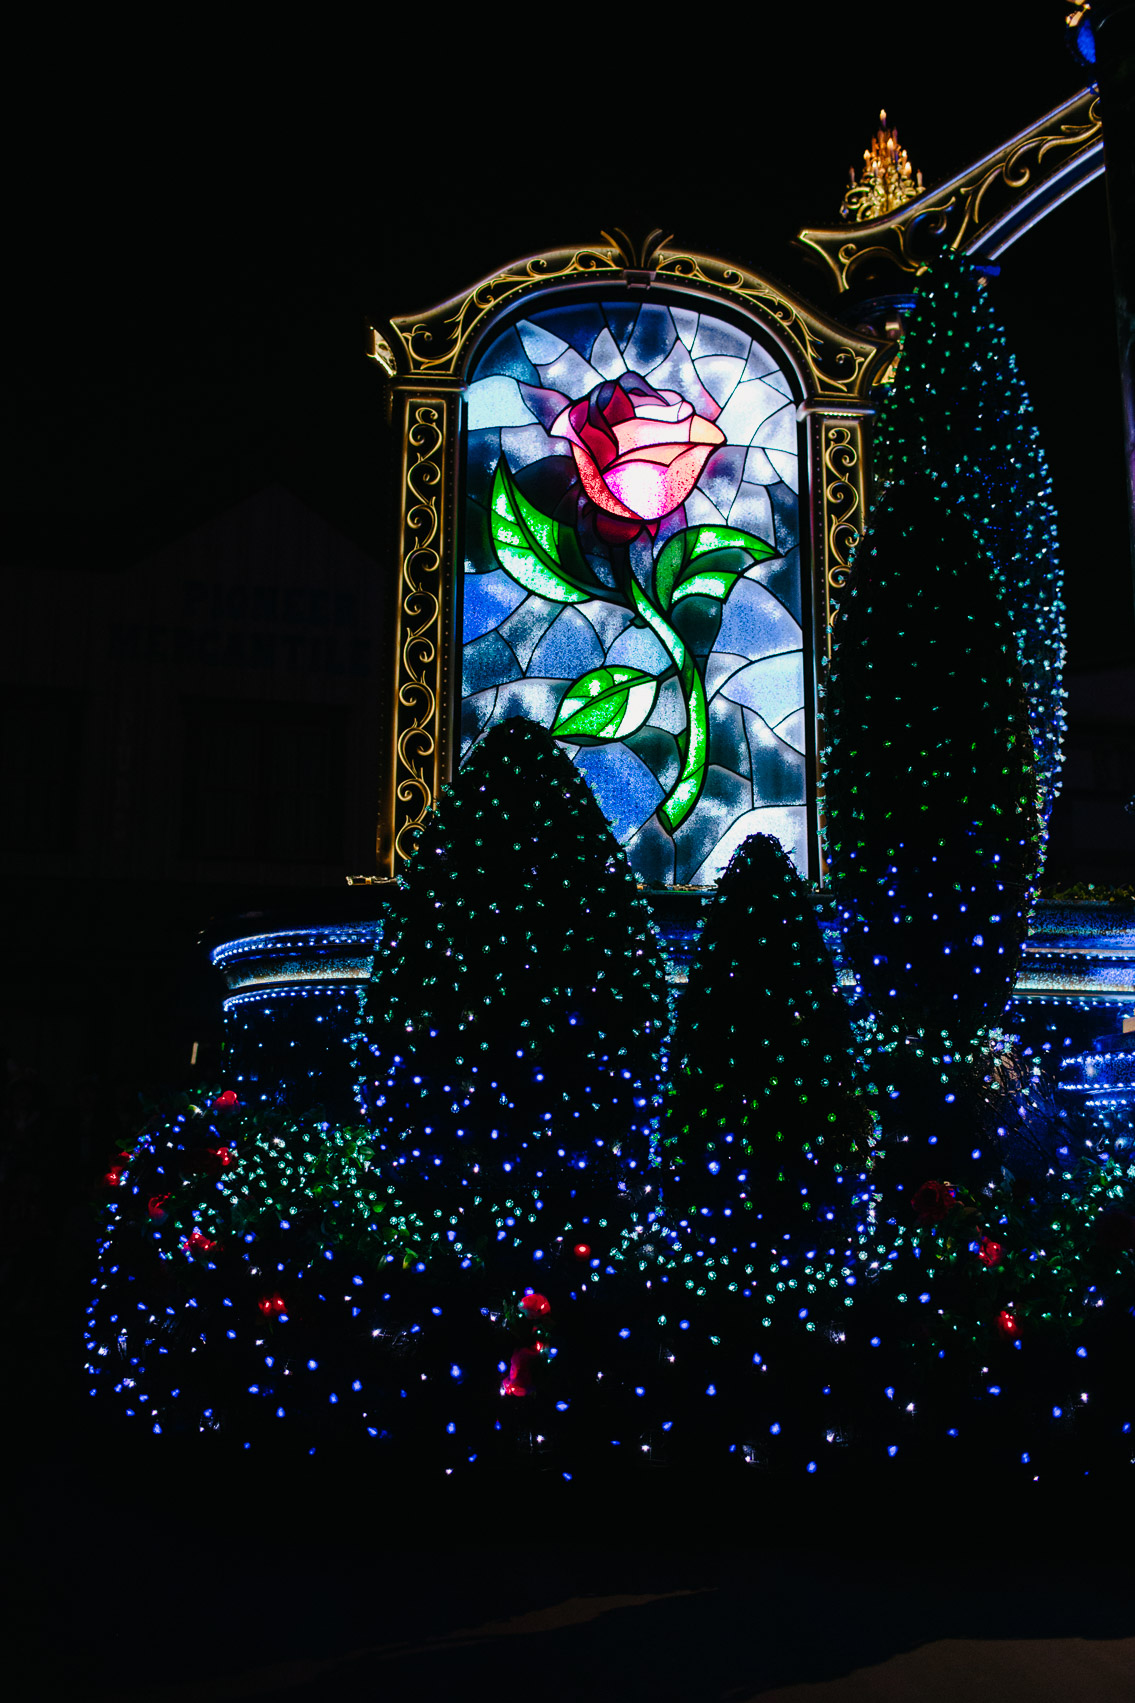 Tokyo Disneyland Electrical parade - The cat, you and us